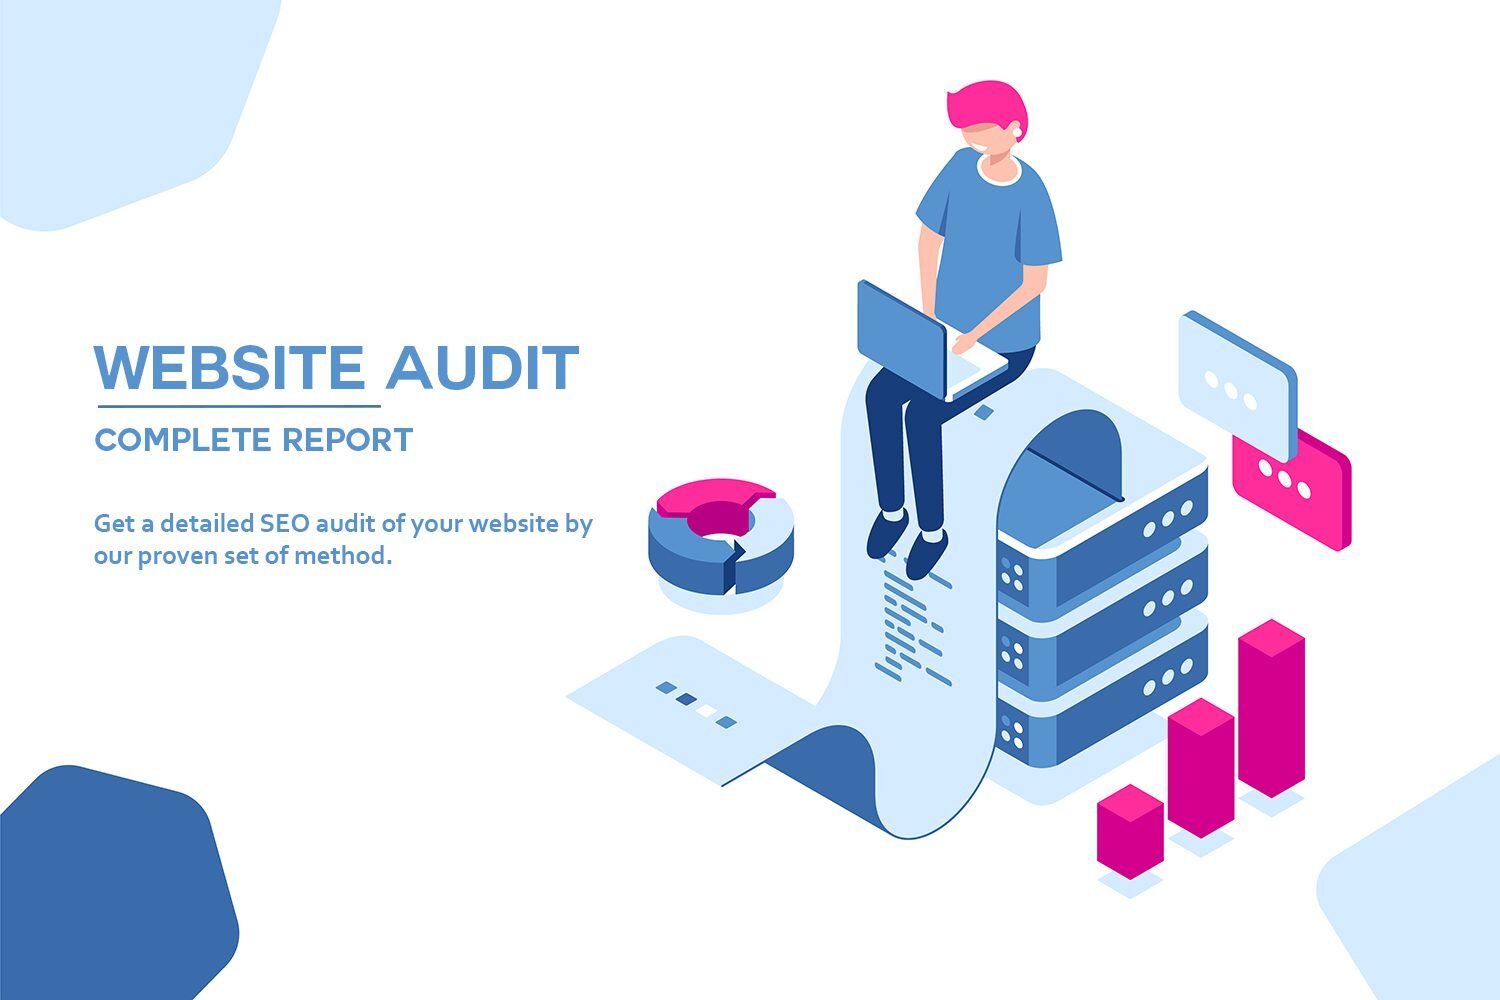 Audit Your Site Review All Websites & Provide SEO Report